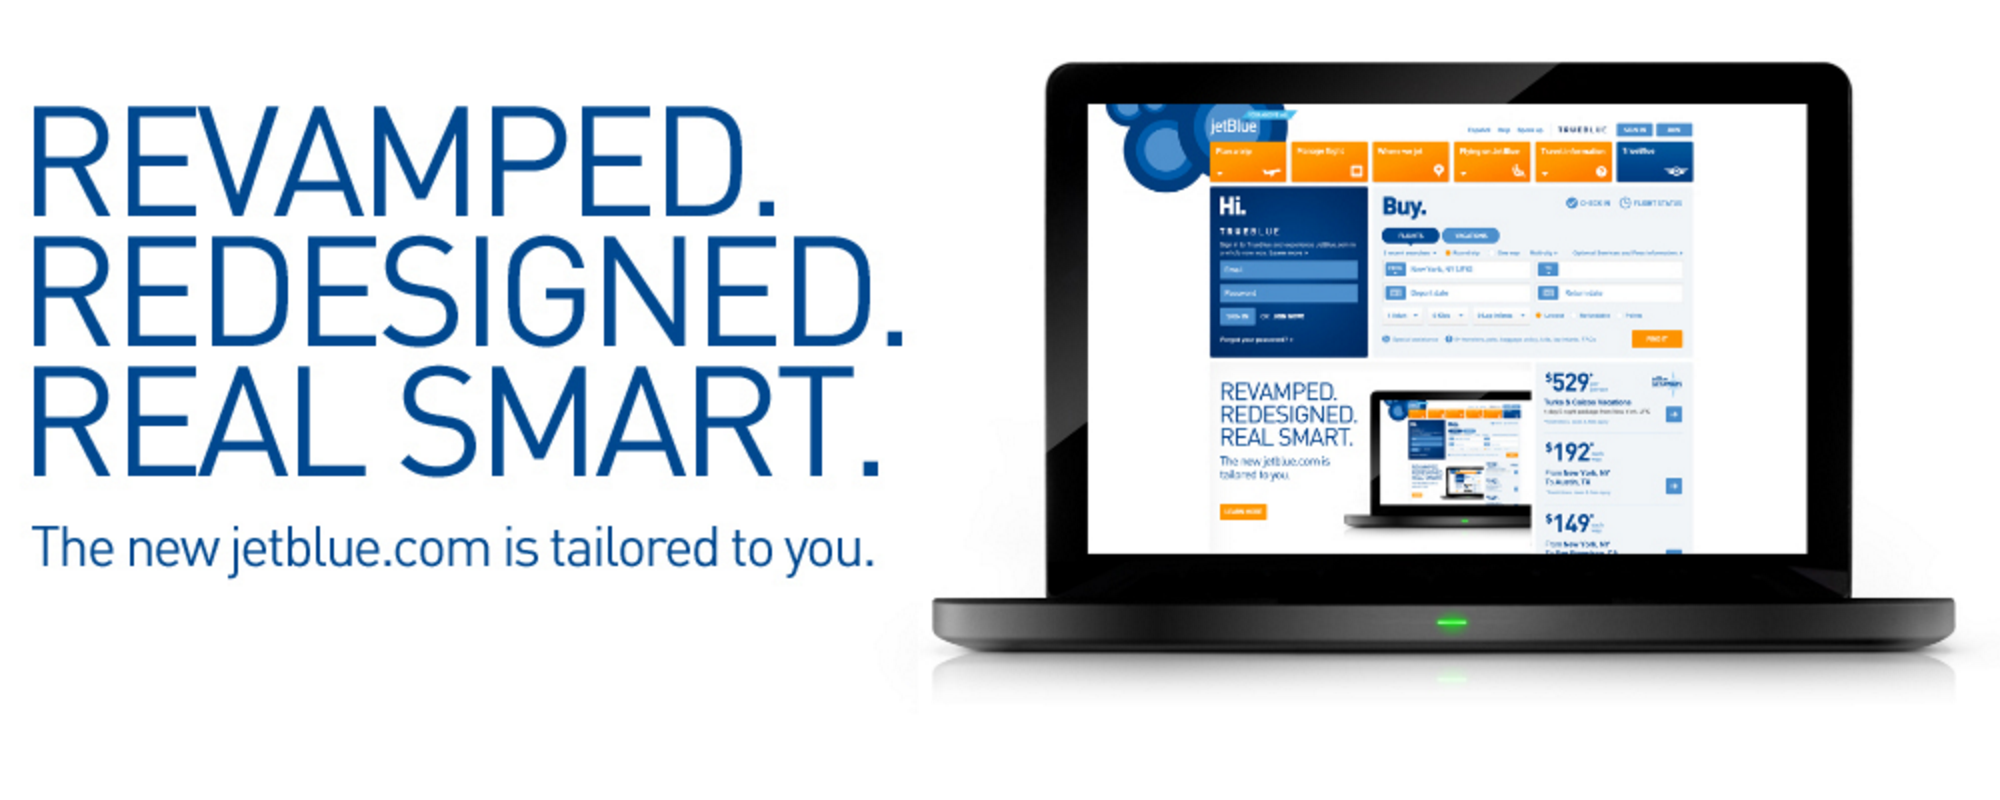 JetBlue created an intuitive, unified digital experience across all of its channels.